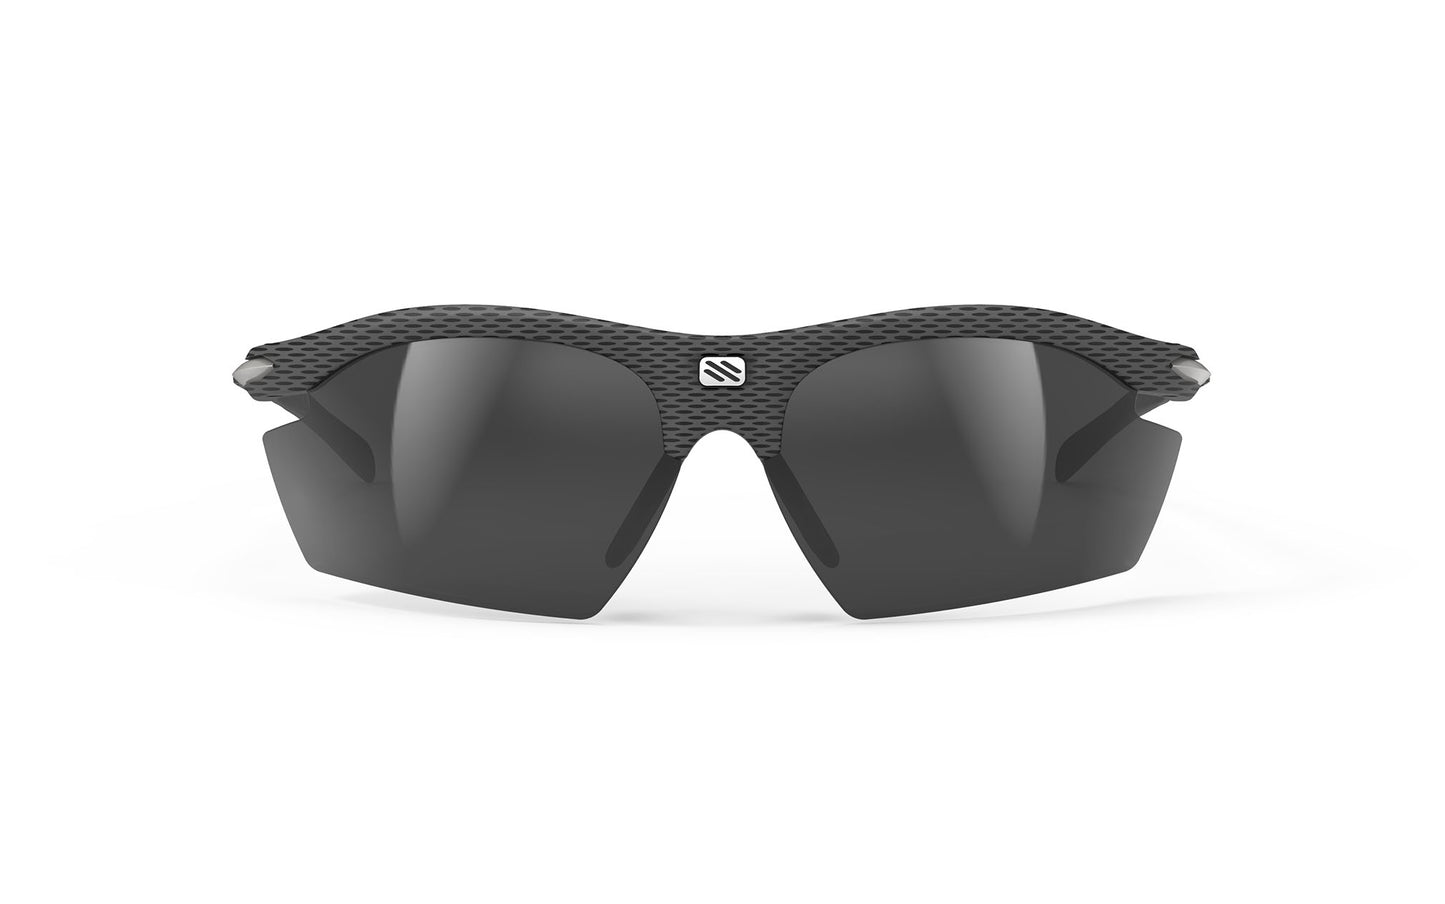 Load image into Gallery viewer, Rudy Project Rydon Carbon - Rp Optics Smoke Black Sunglasses
